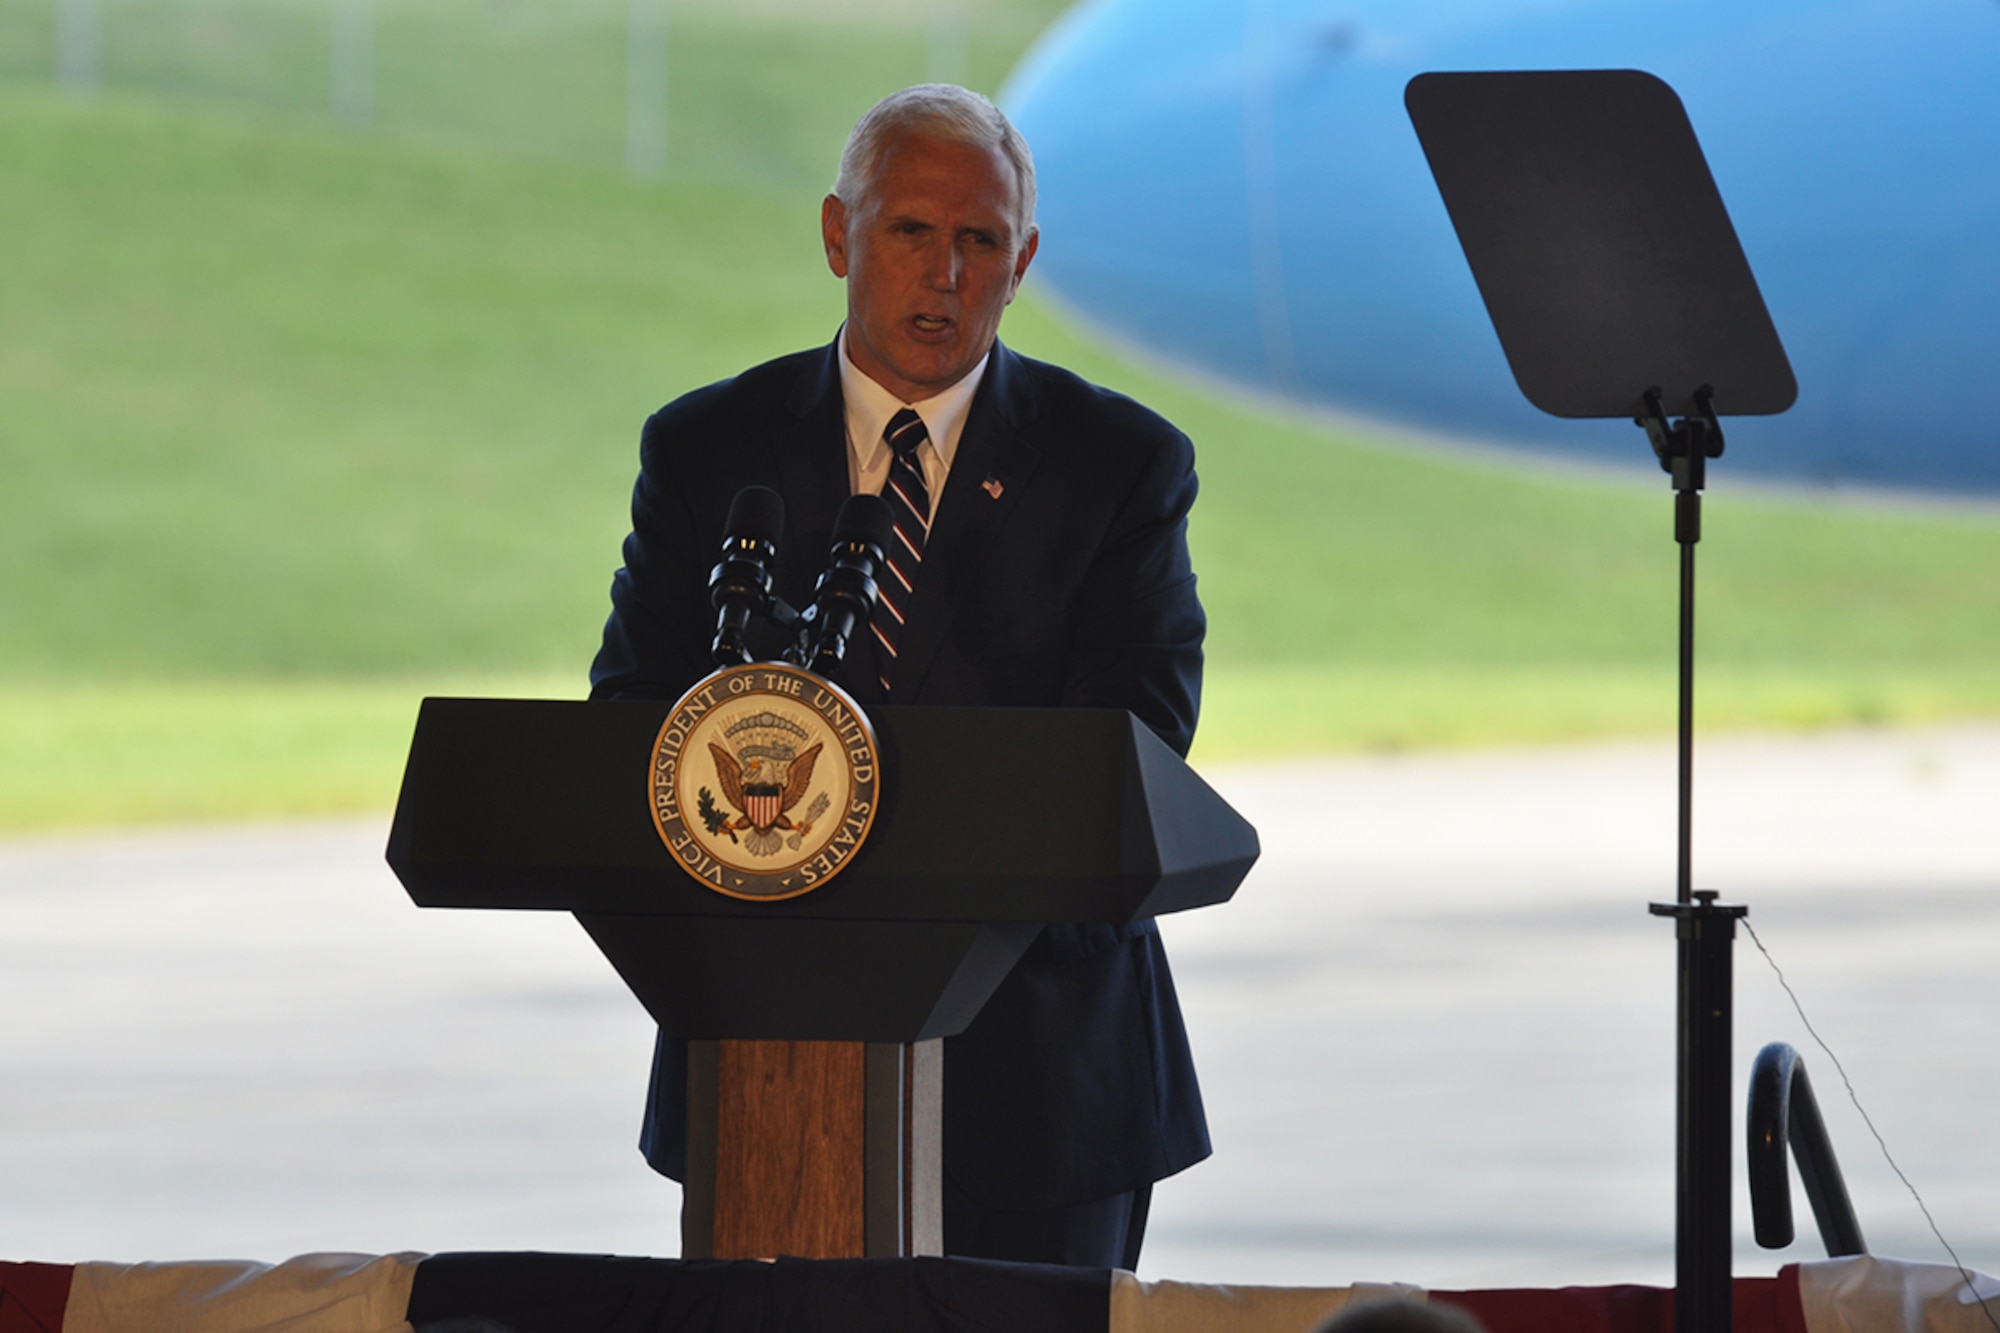 Vice President Mike Pence pledges the administration’s full support of our military service members and our national defense while visiting Dobbins Air Reserve Base, Georgia June 9, 2017. During a 20 minute address to service members, civilians and families, he stressed that there’s no higher priority than America’s safety, and President Donald J. Trump will make historic investments in our military. (U.S. Air Force photo/James Branch)